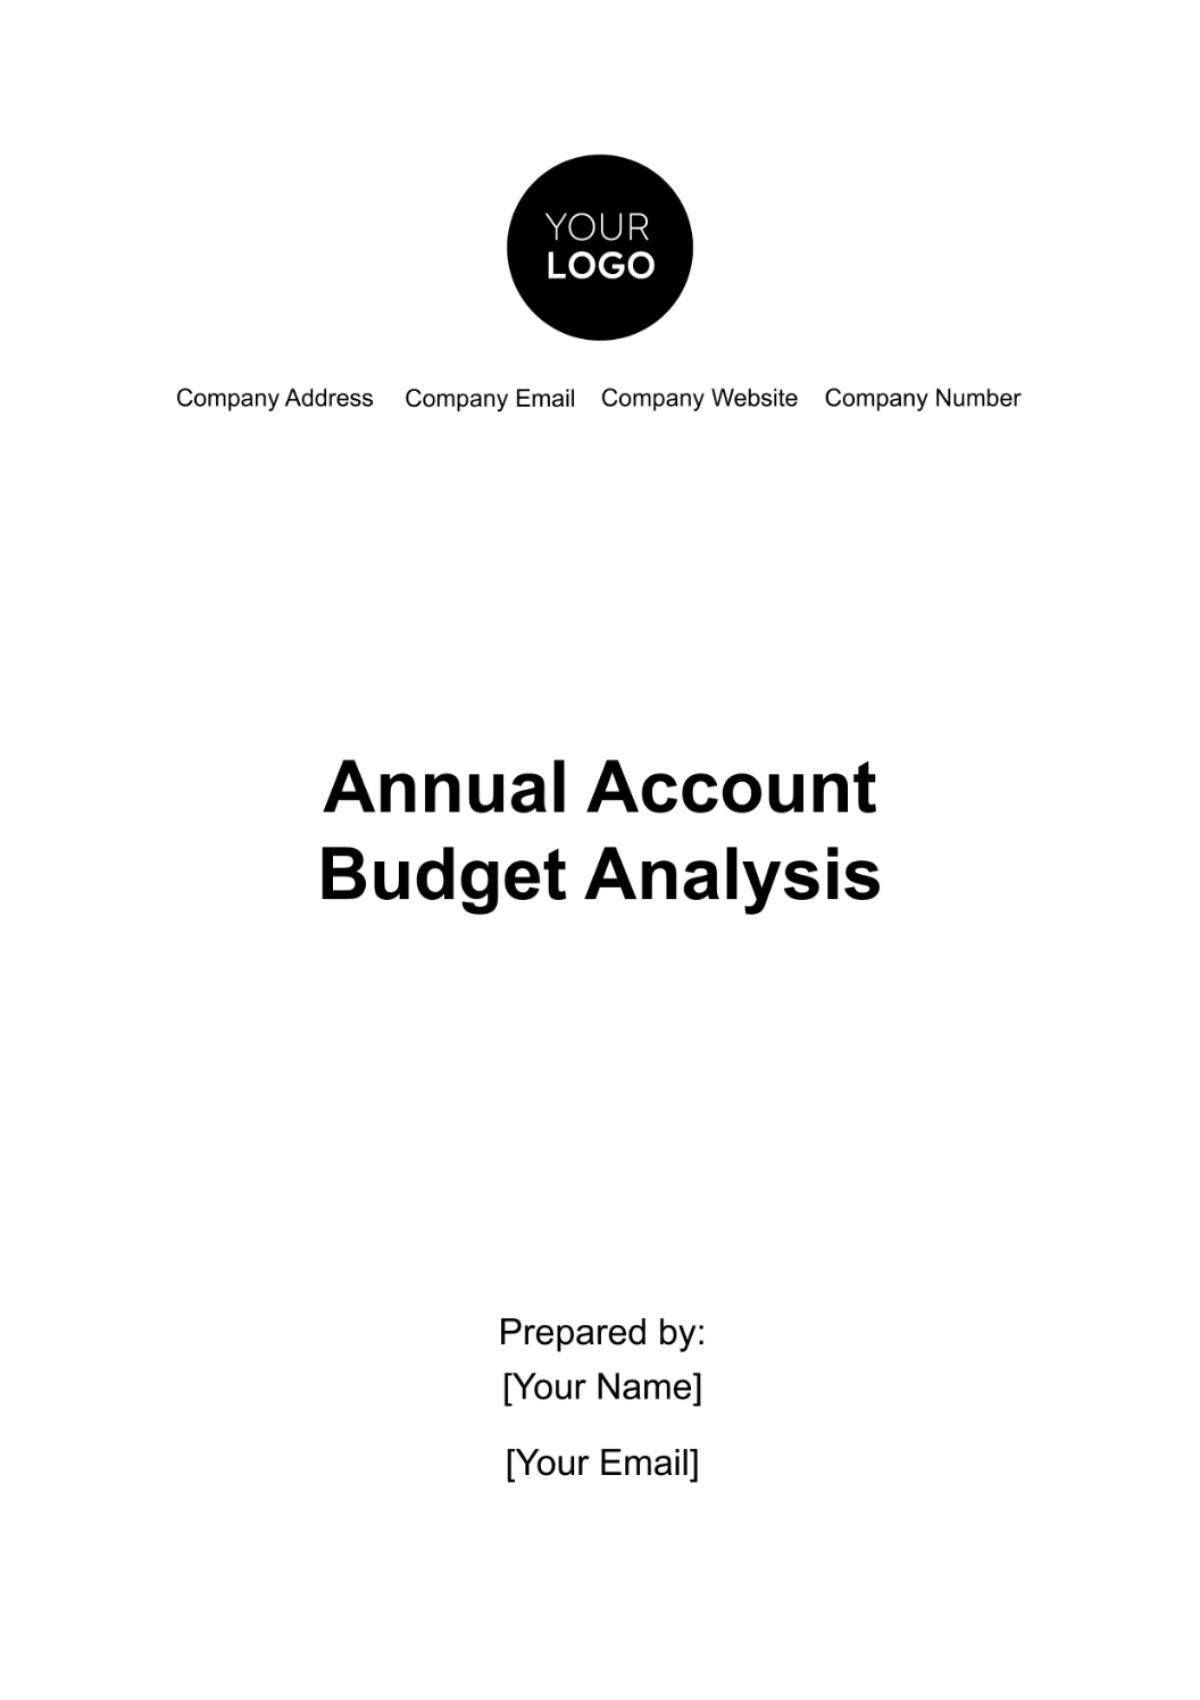 Annual Account Budget Analysis Template